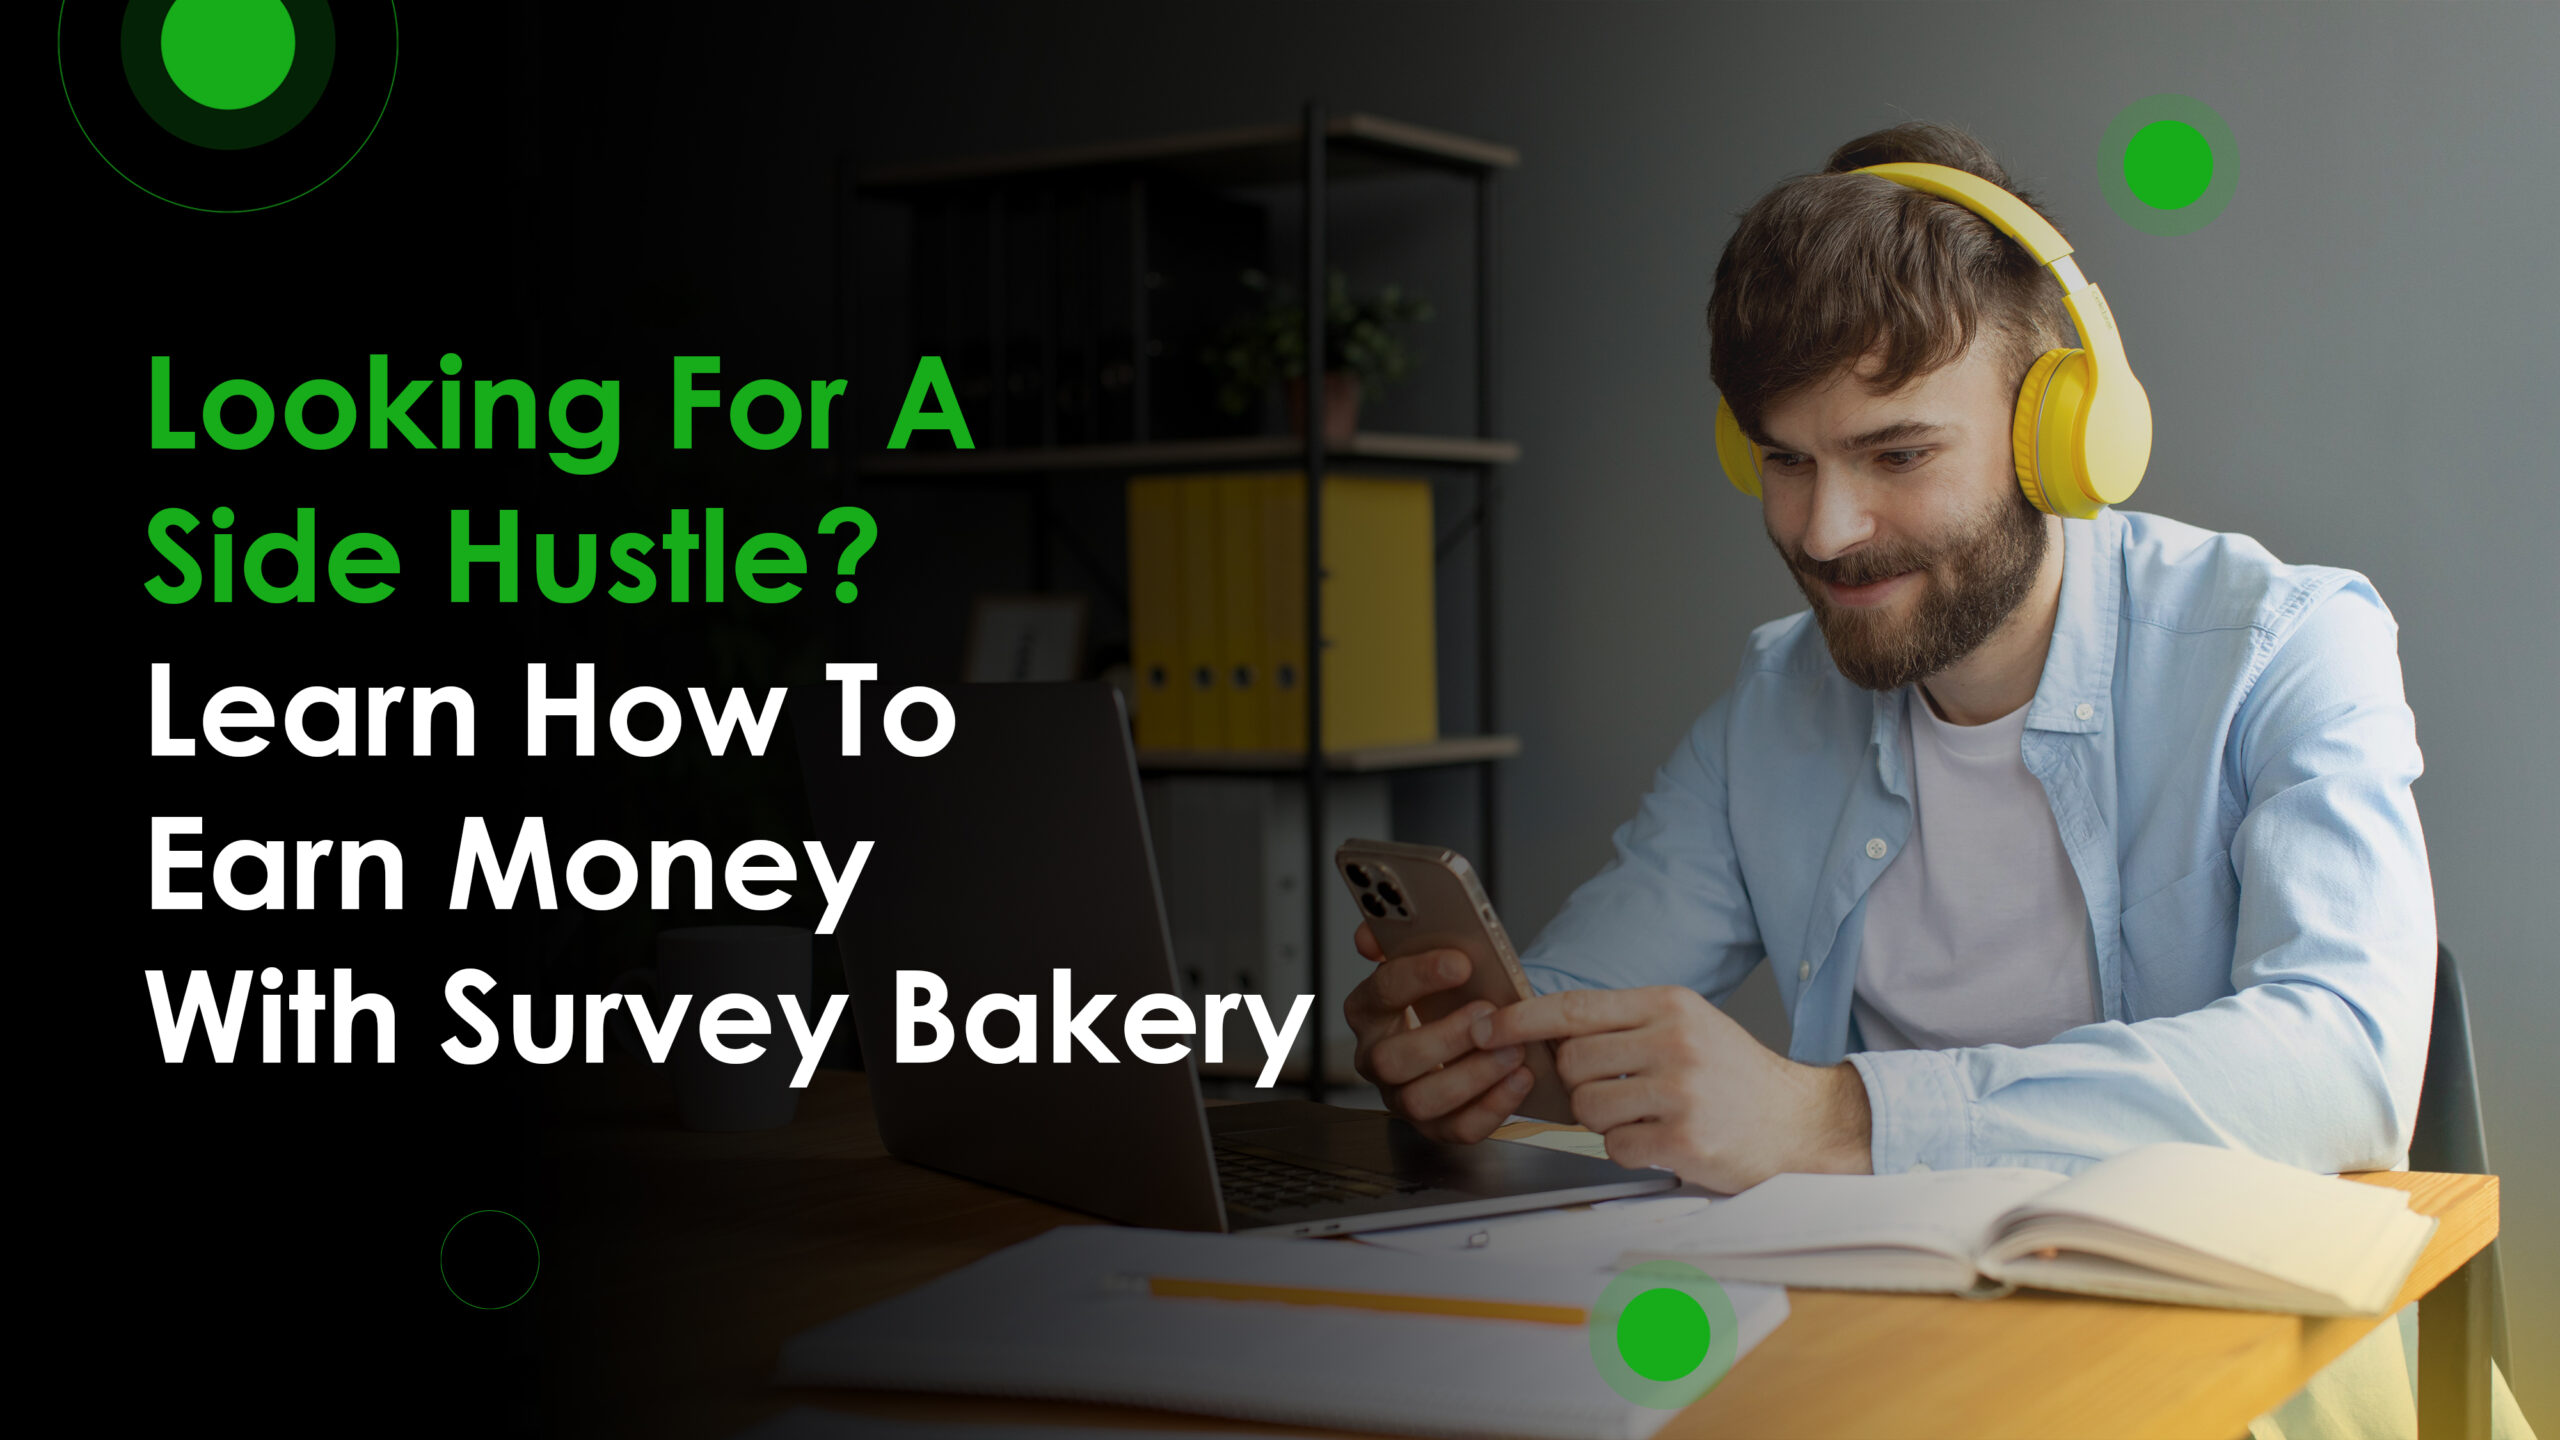 You are currently viewing Looking For A Side Hustle? Learn How To Earn Money With Survey Bakery